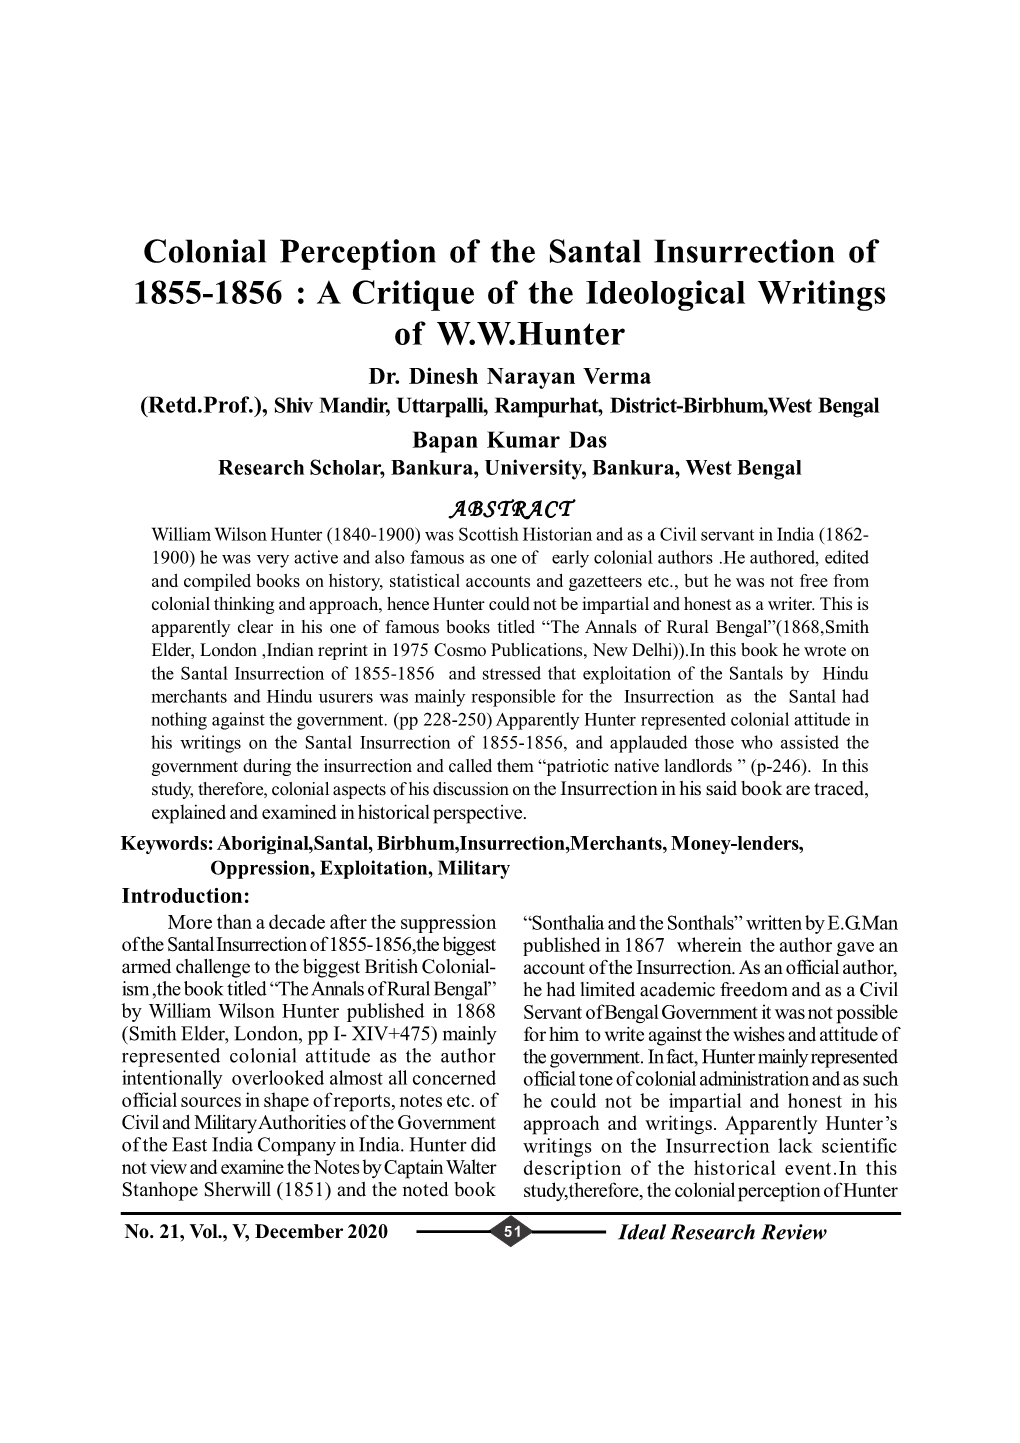 Colonial Perception of the Santal Insurrection of 1855-1856 : a Critique of the Ideological Writings of W.W.Hunter Dr